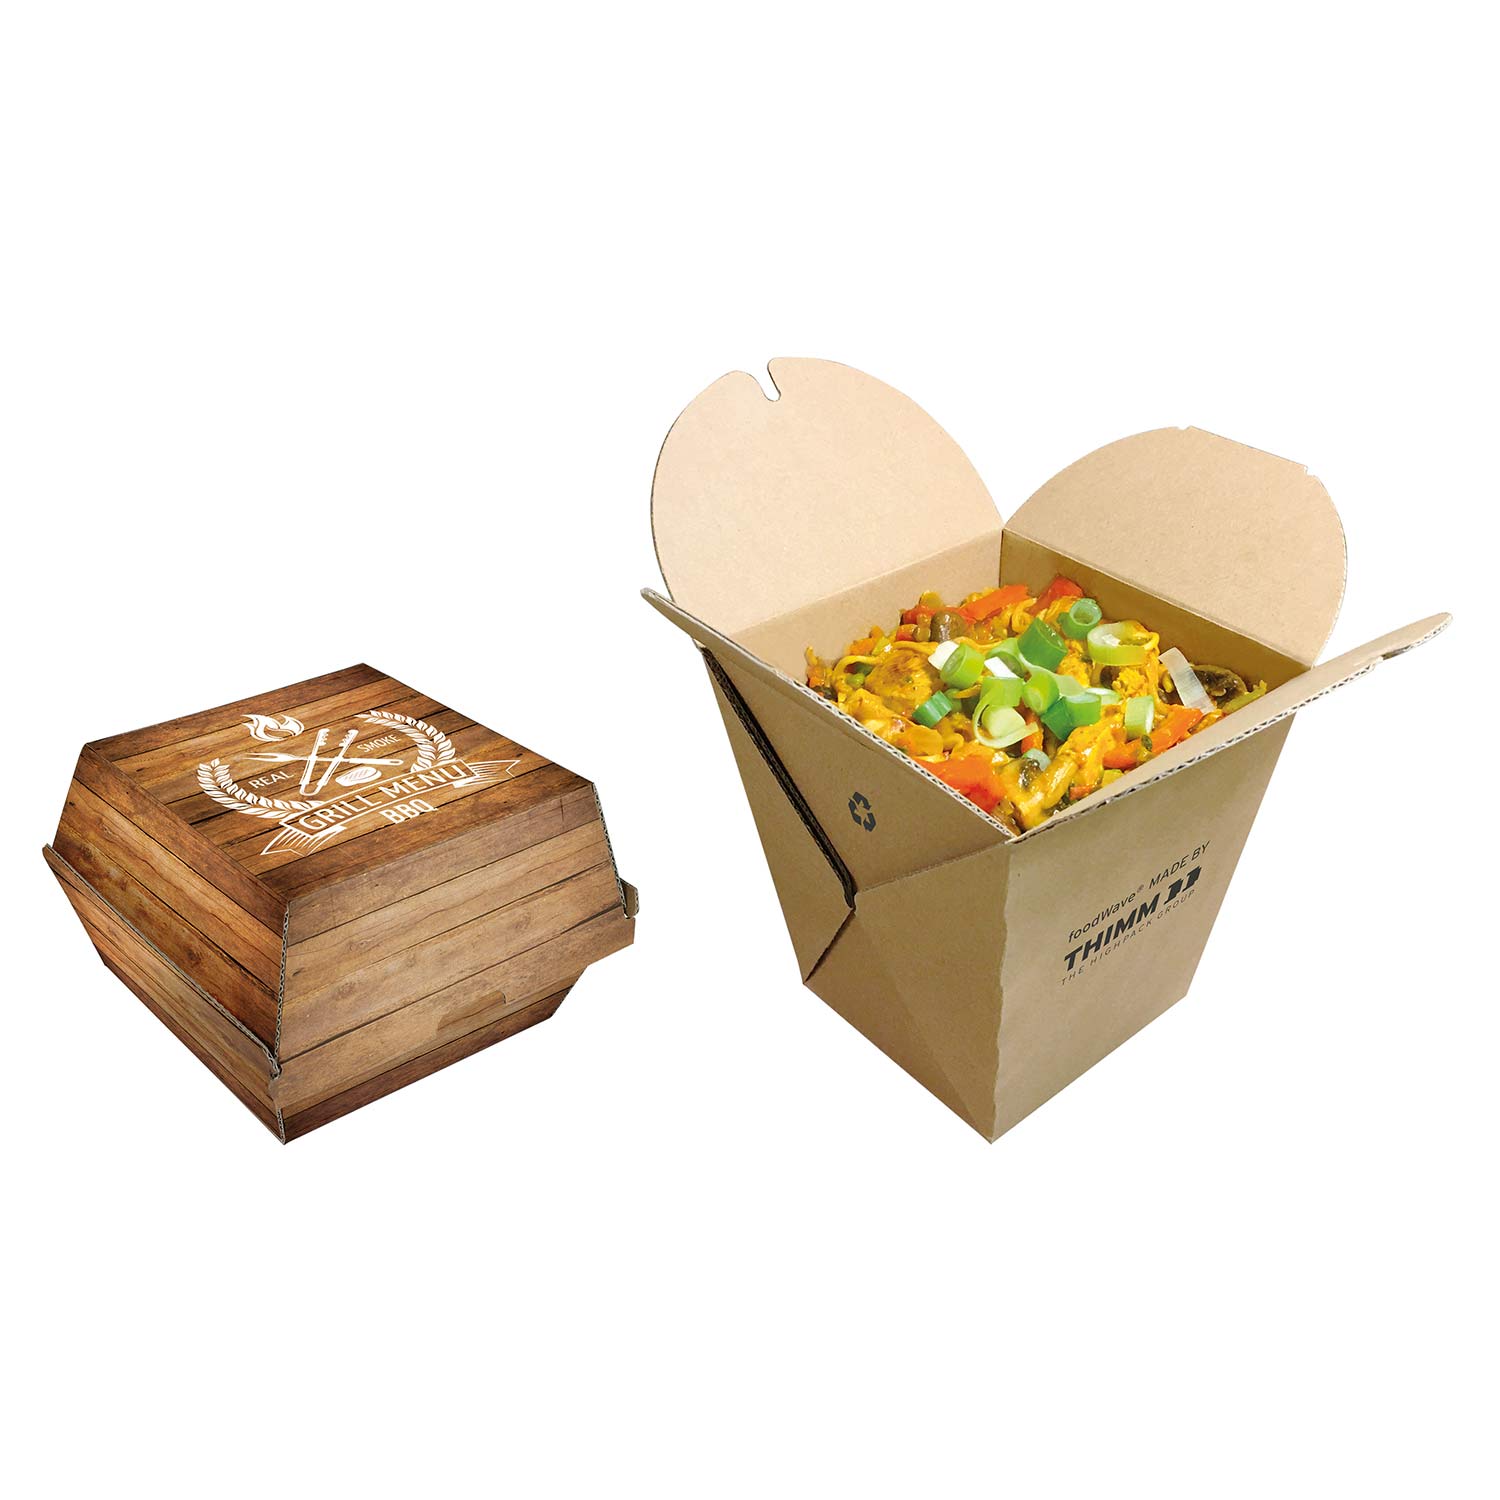 Sustainable food boxes